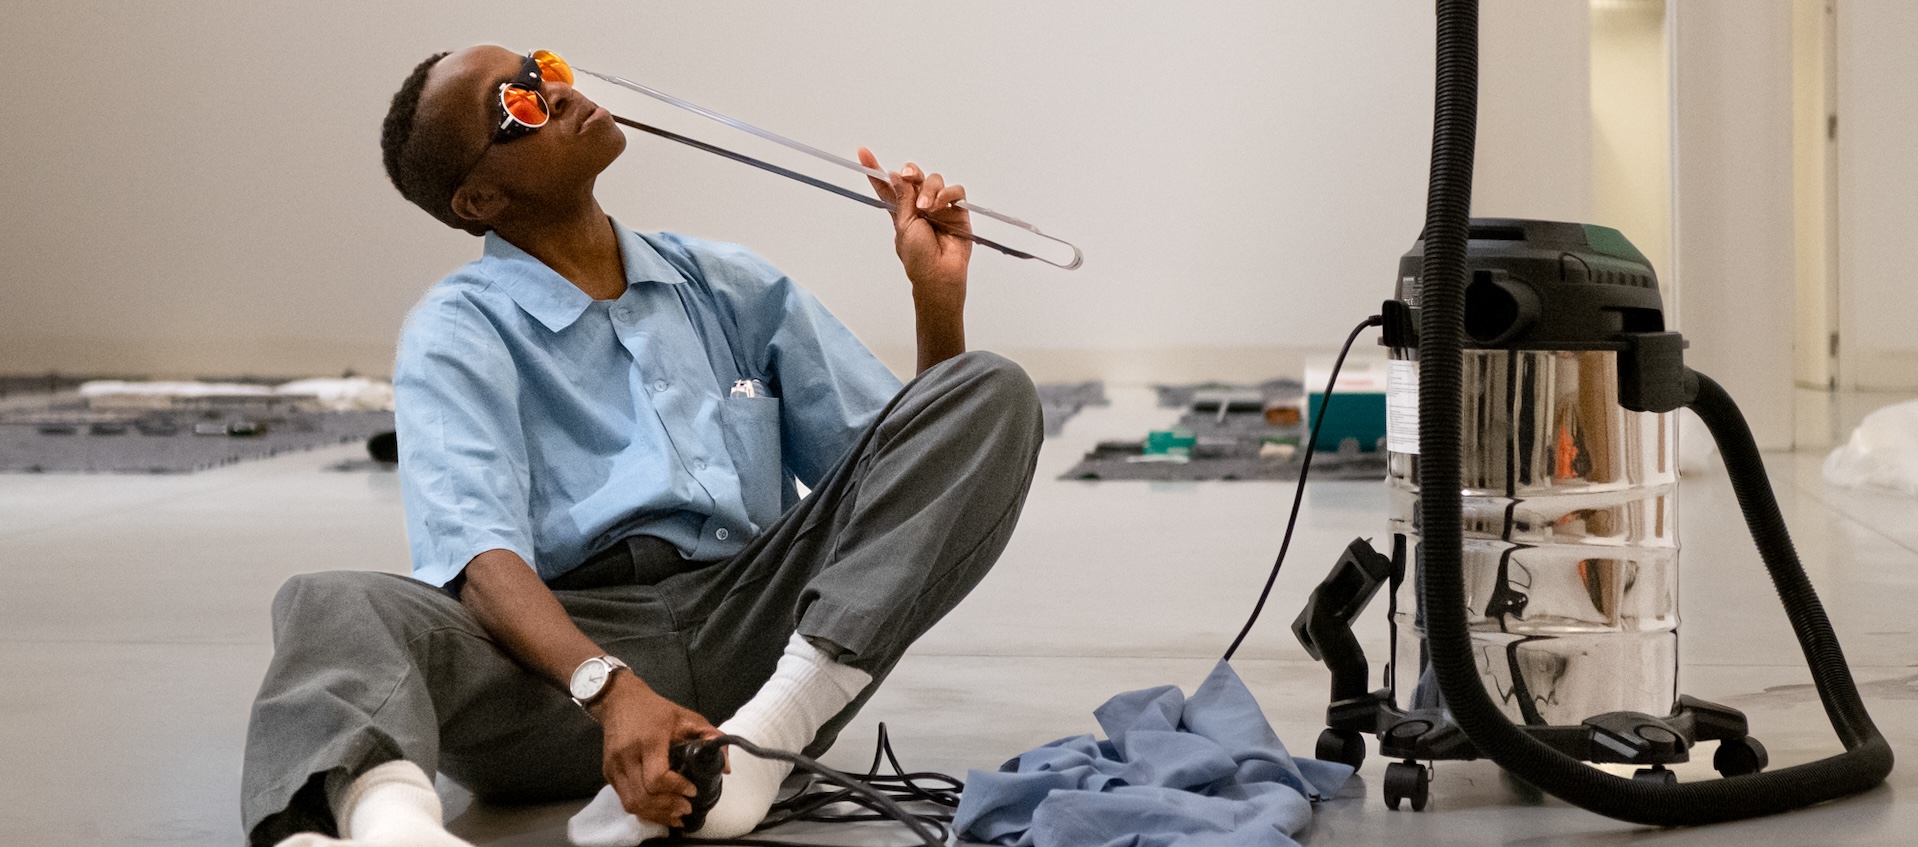 A person with dark skin, close-cropped hair and sunglasses sits in a white gallery space, holding tongs close to their face. A large canister vacuum is next to them.